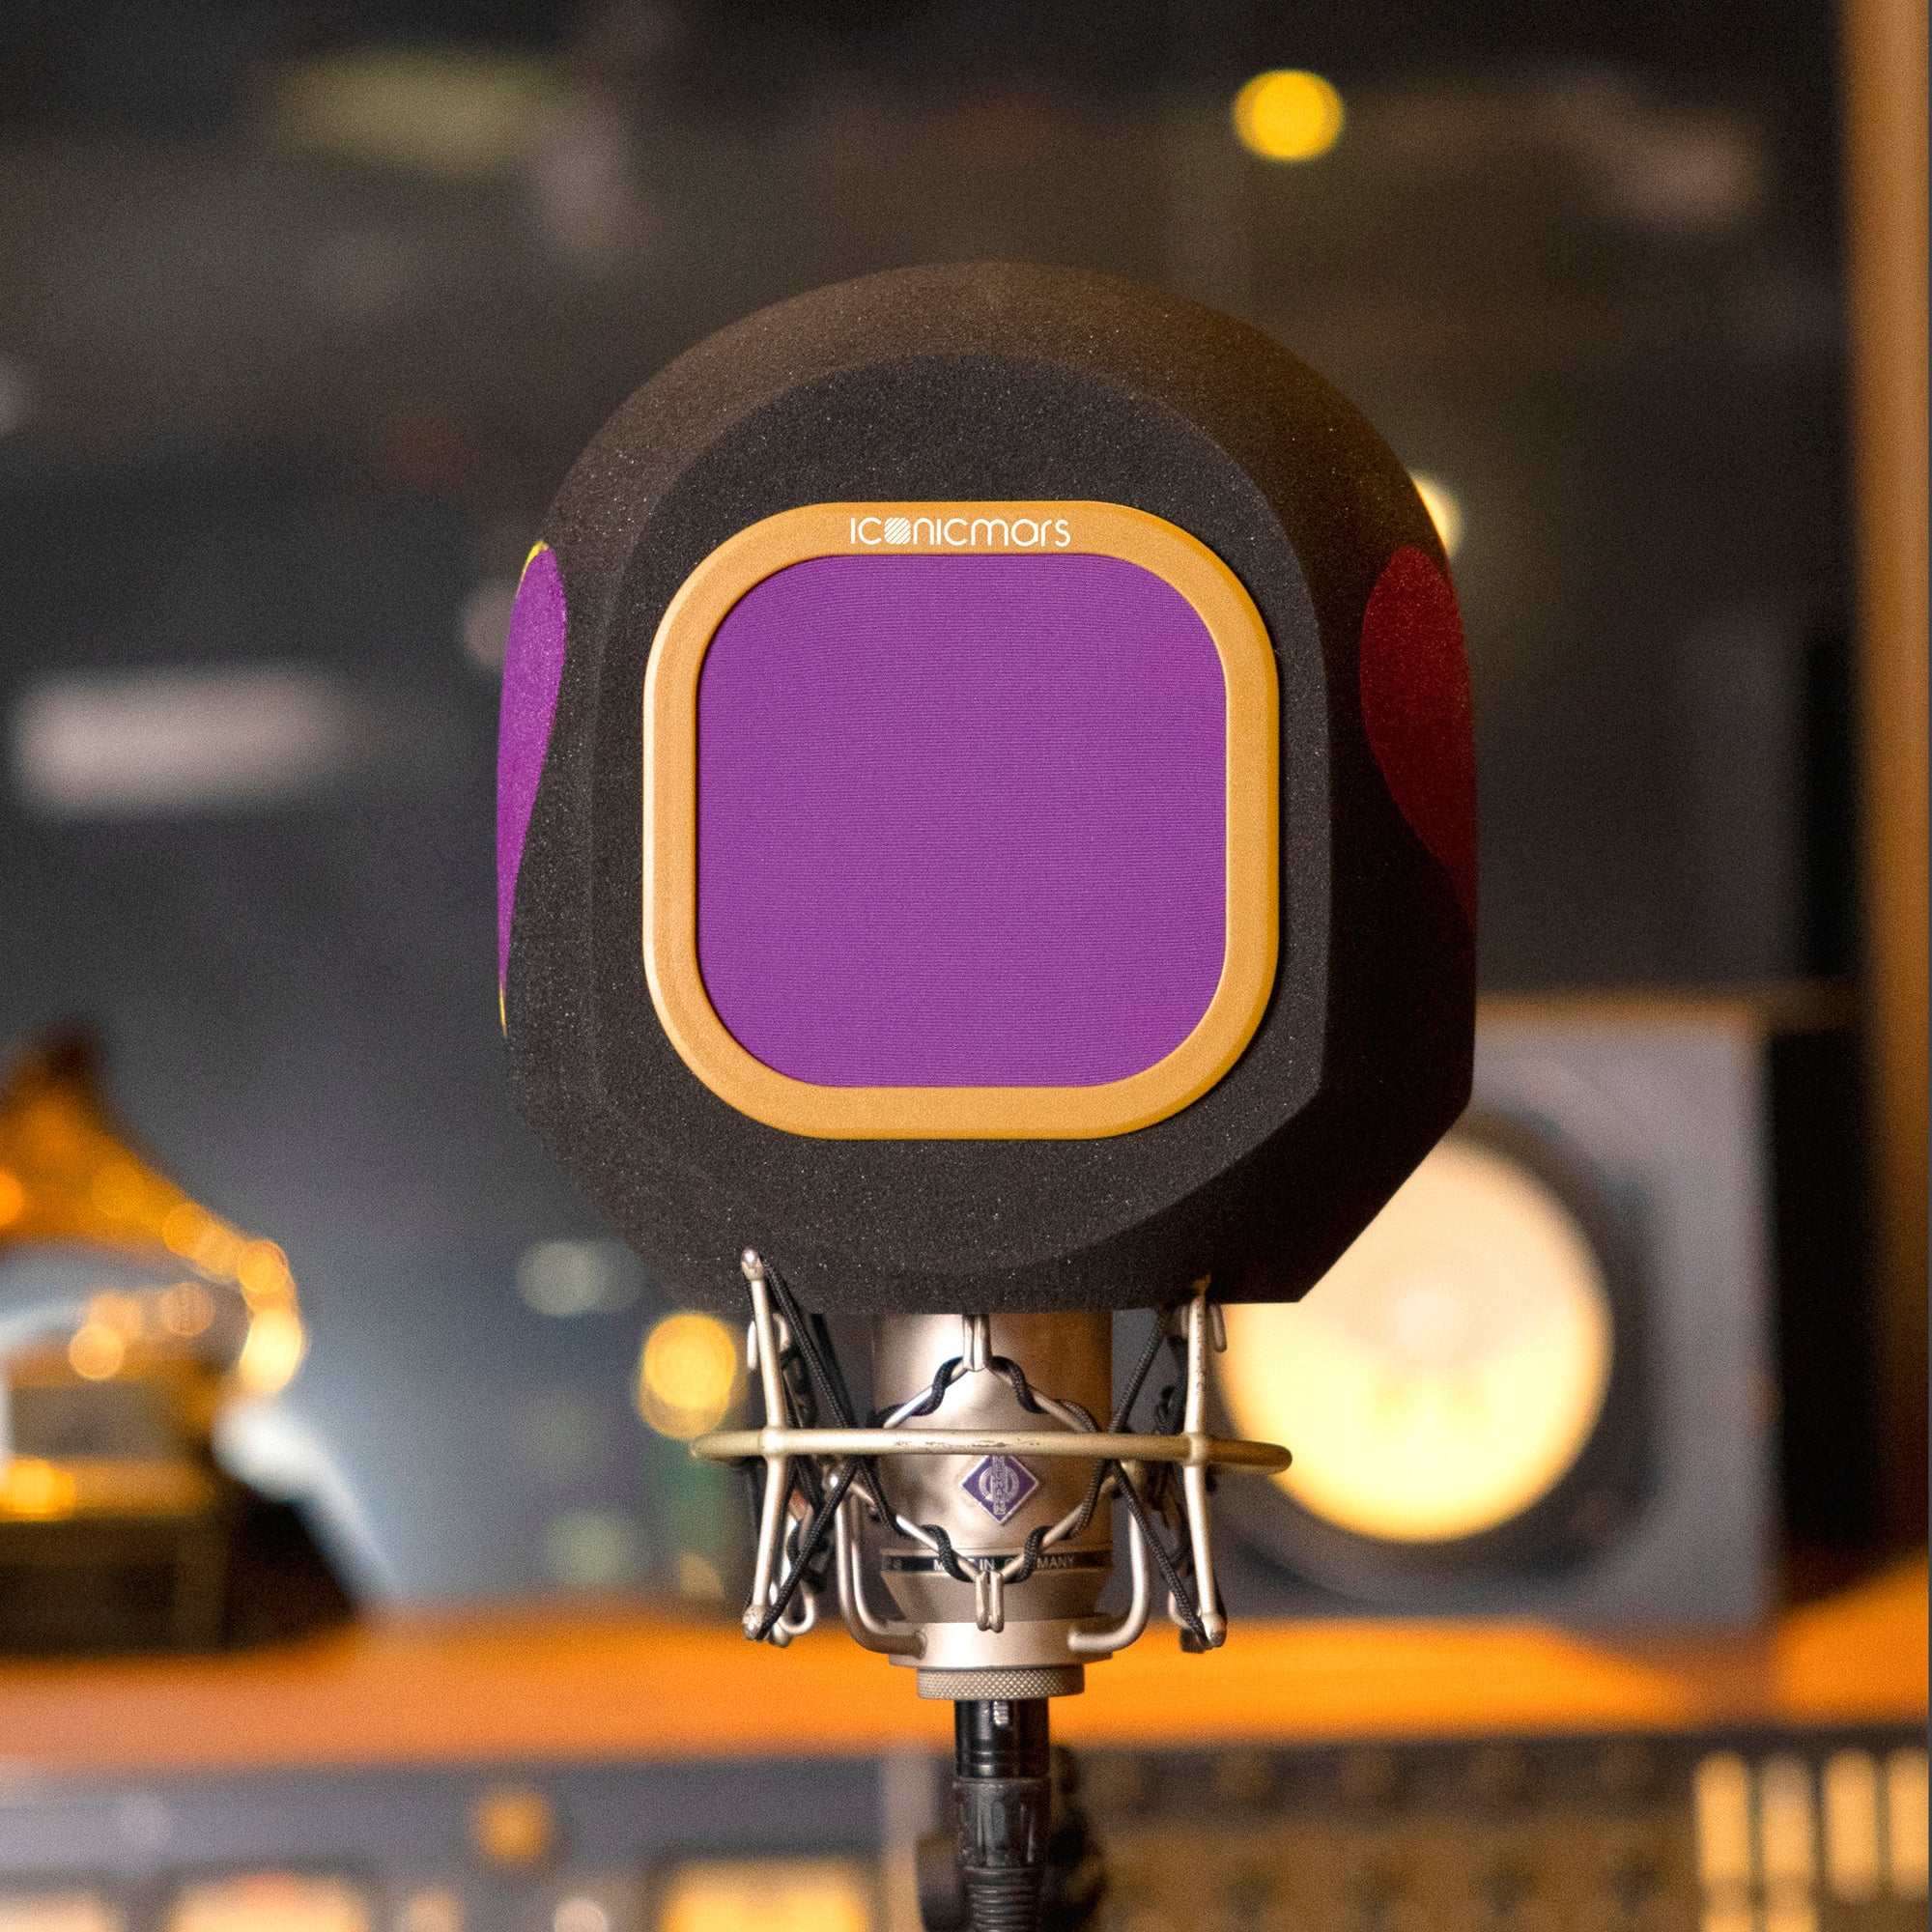 Purple hearts painted on side of iso shield with purple and tan pop filter on microphone stand